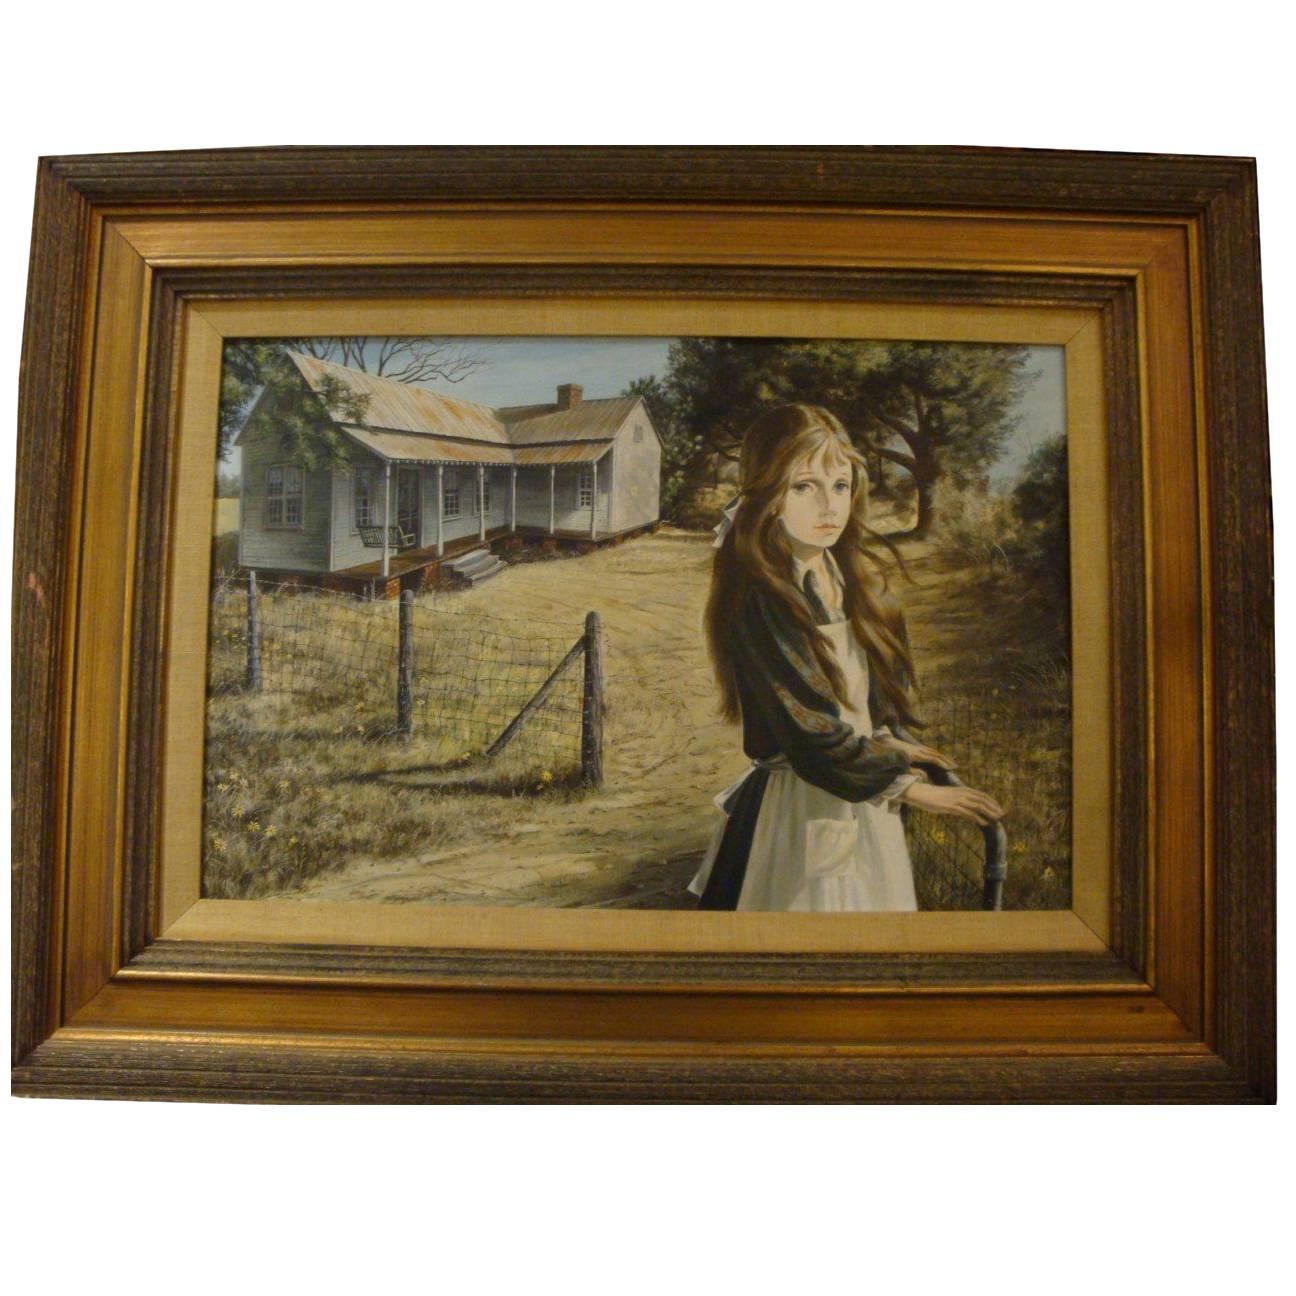 Rare Large Original Museum Painting of a Girl Outdoors Pati Bannister, 1929-2013 For Sale